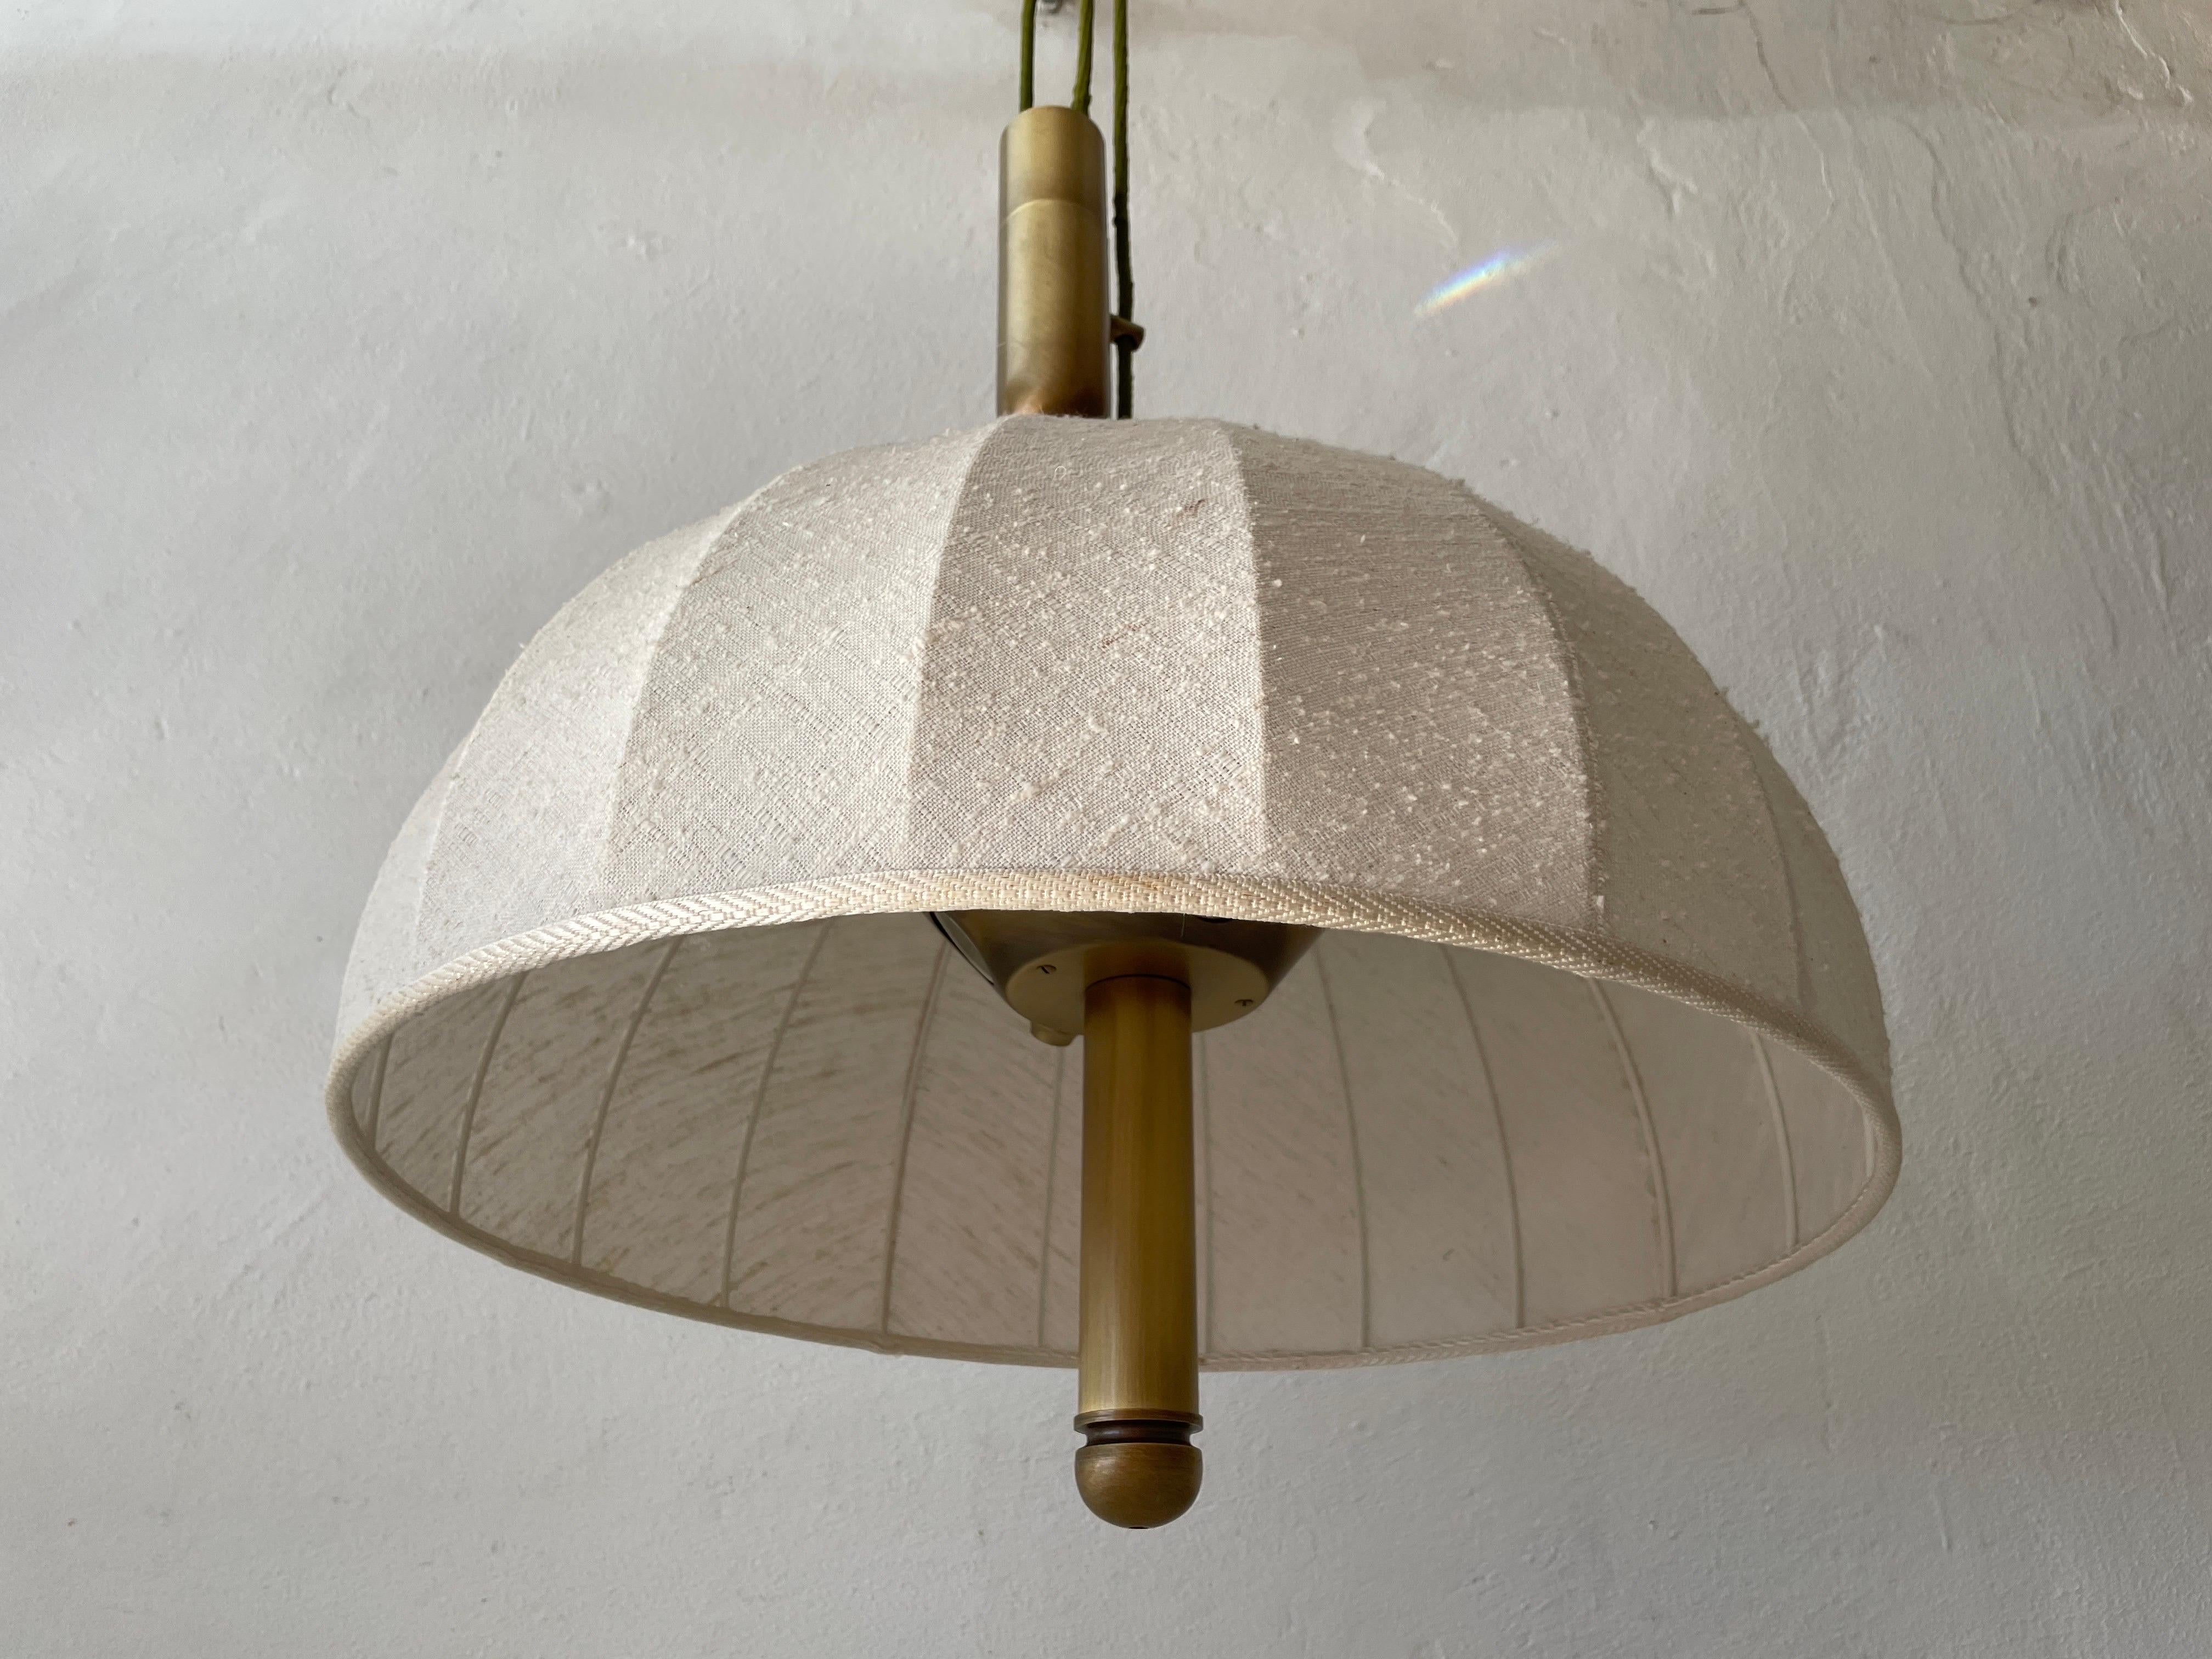 Mid-Century Modern Brass & Fabric Shade Counterweight Pendant Lamp by Wkr, 1970s, Germany